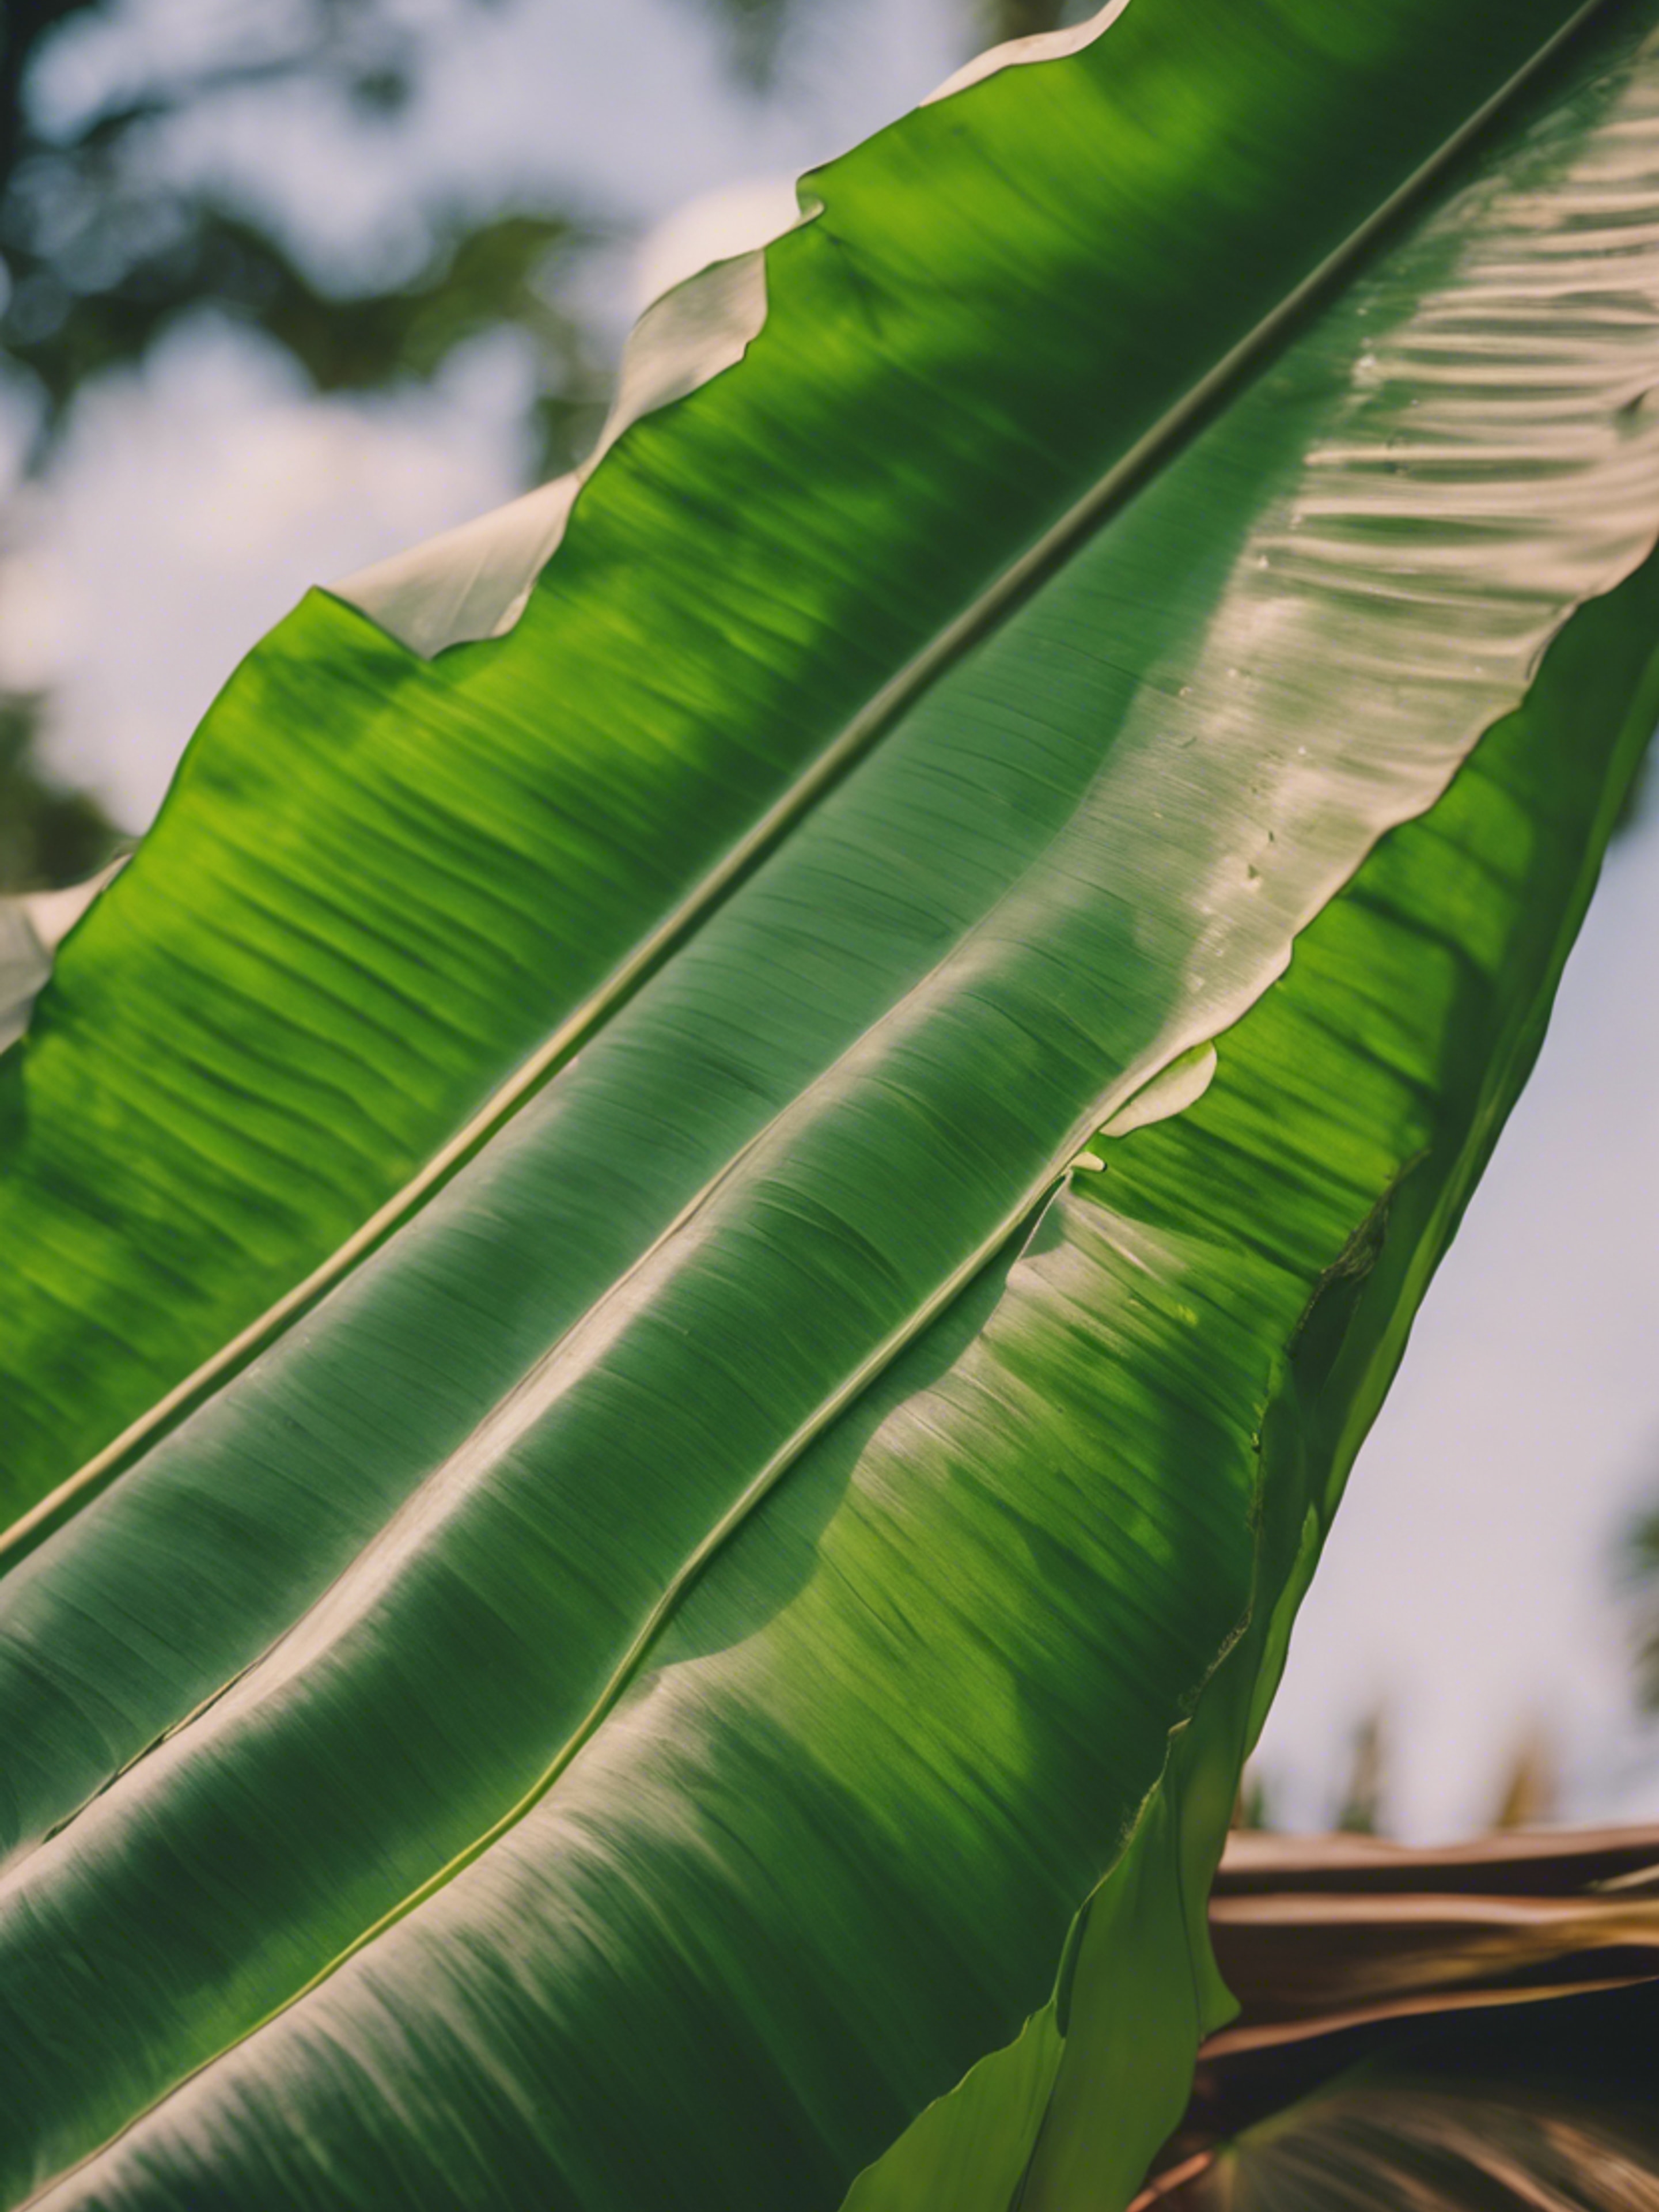 A banana leaf fashioned into a simple but sturdy homemade kite. Kertas dinding[67483886efc74c5189dd]